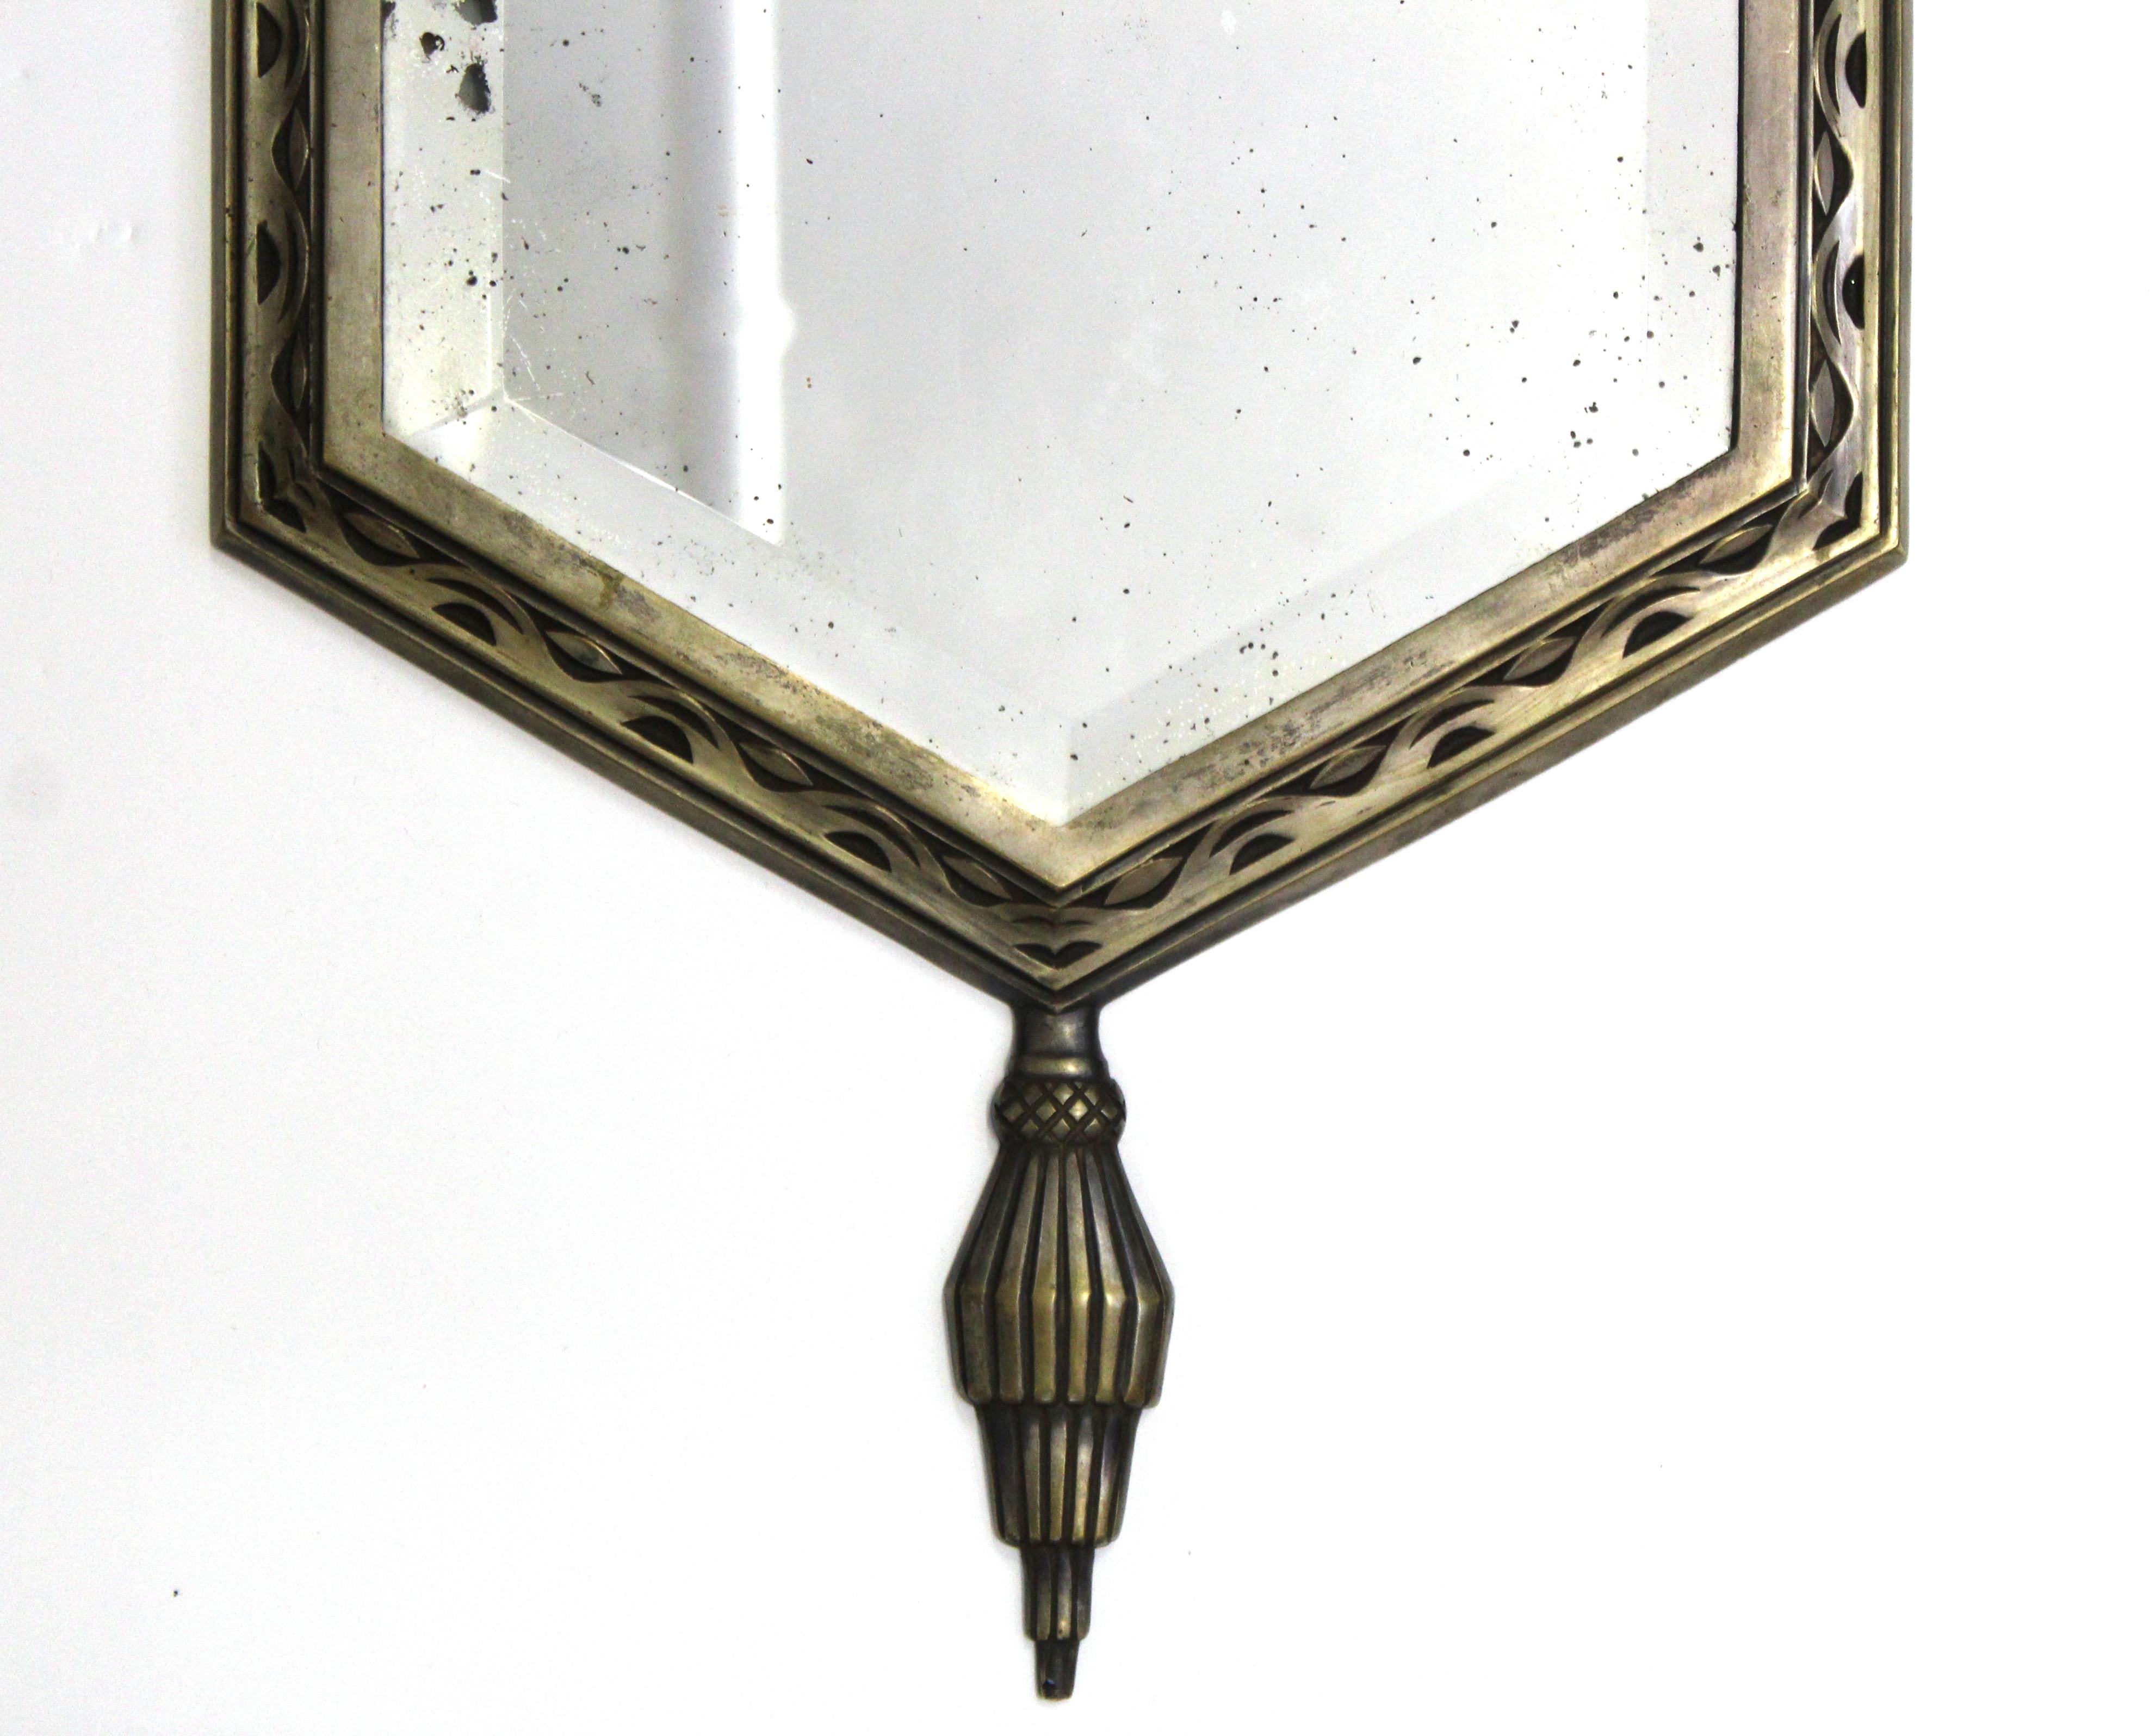 Belgian Art Deco diminutive wall mirror with original double-beveled hexagonal mirror inserted into nickel over bronze frame. The piece was made in Belgium in the 1920s and is in great antique condition with age-appropriate wear and use. 'Made in